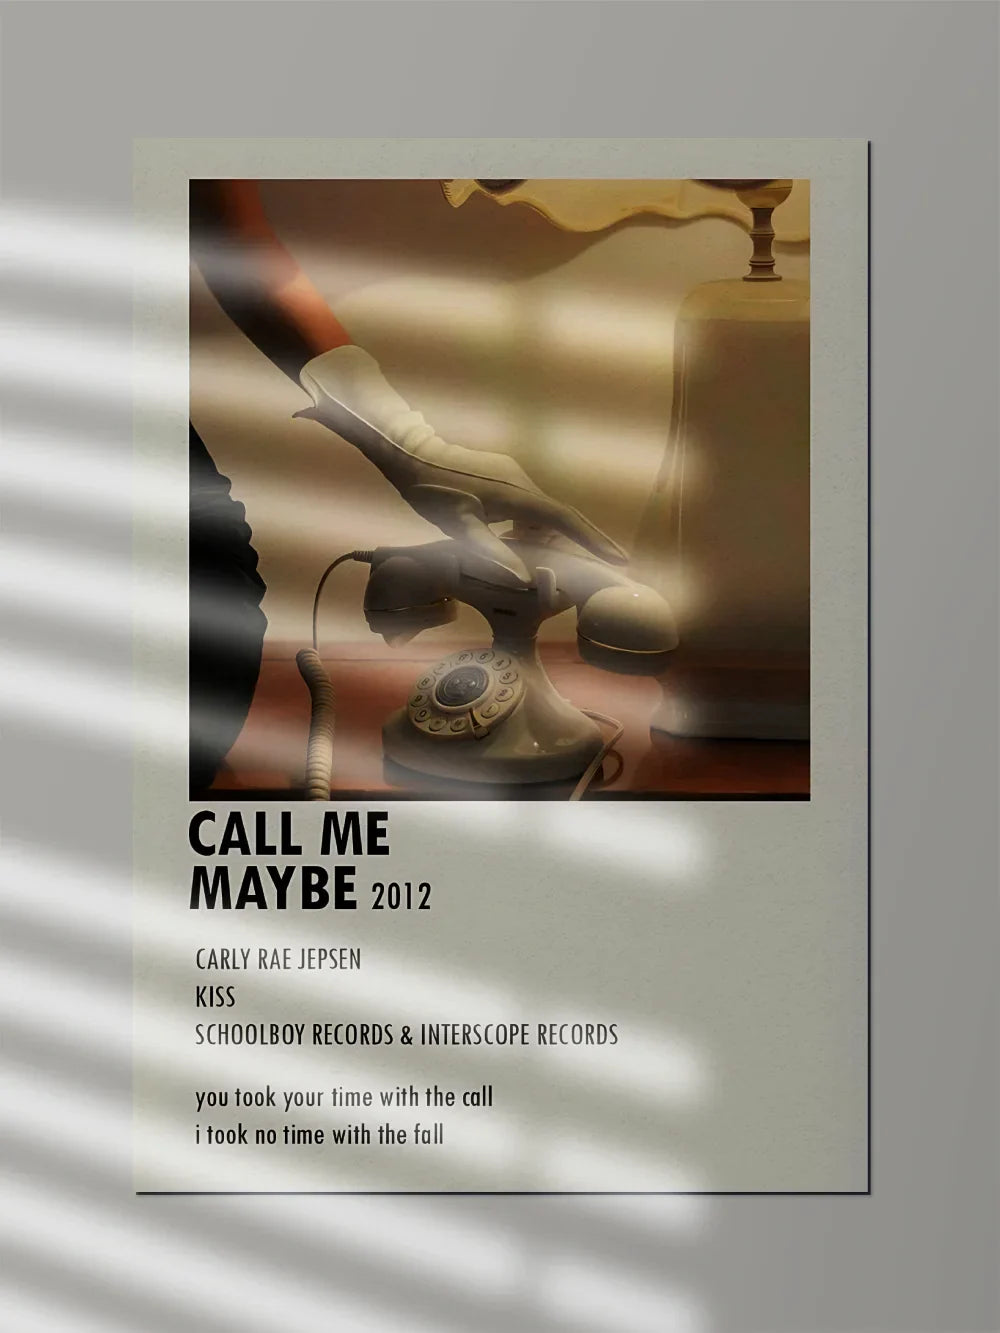 Call Me Maybe 2012 x ft. Carly Rae Jepsen & School Boy Records | Music Poster